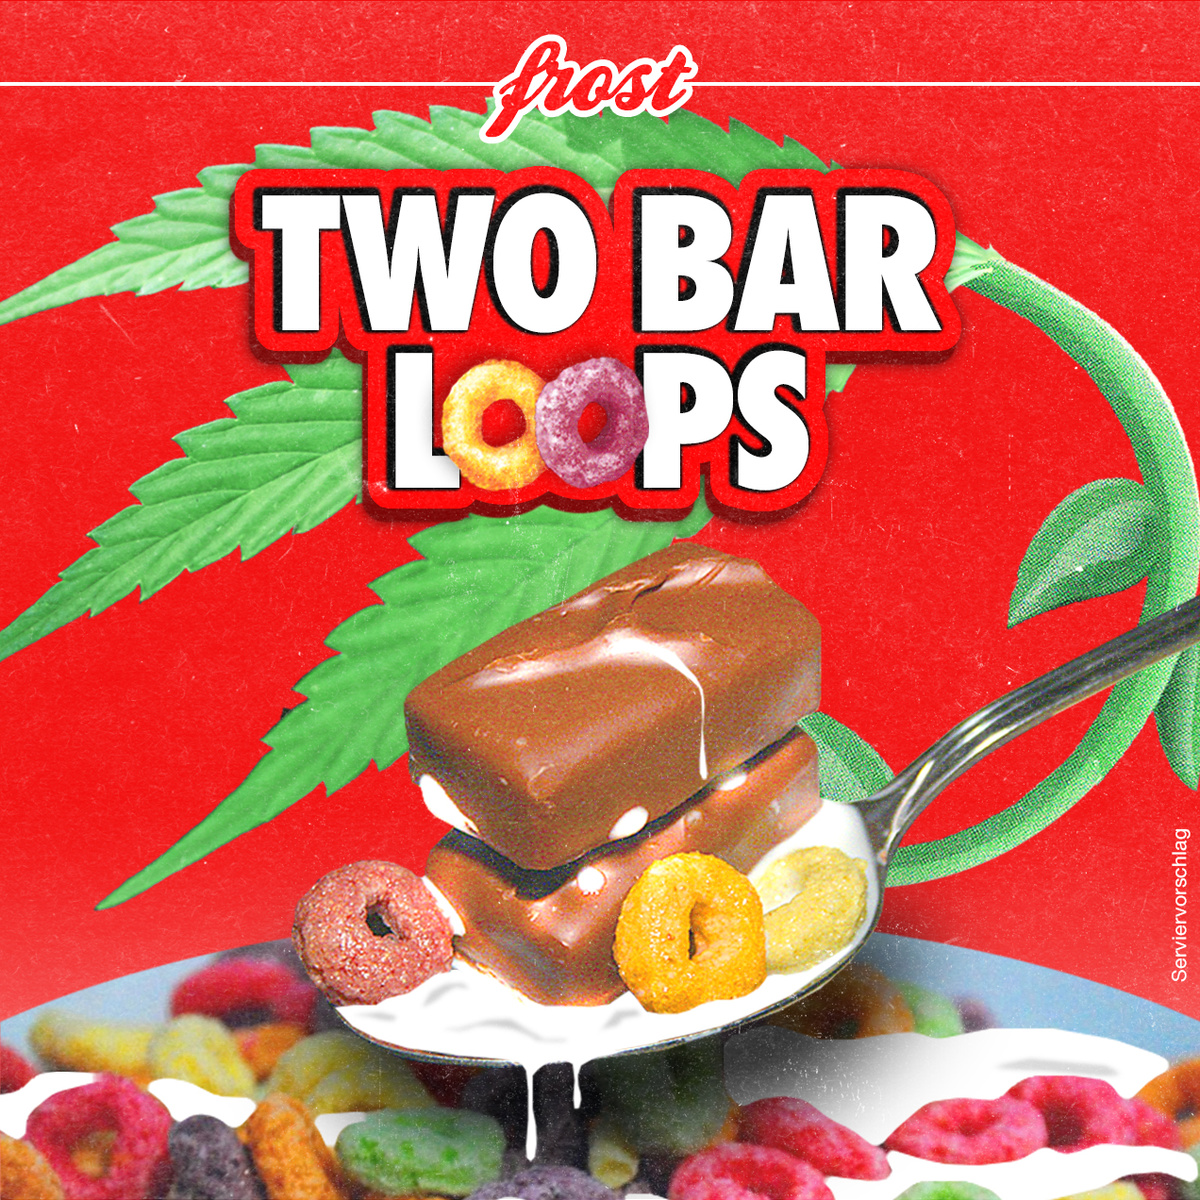 Free Download: Frost – Two Bar Loops